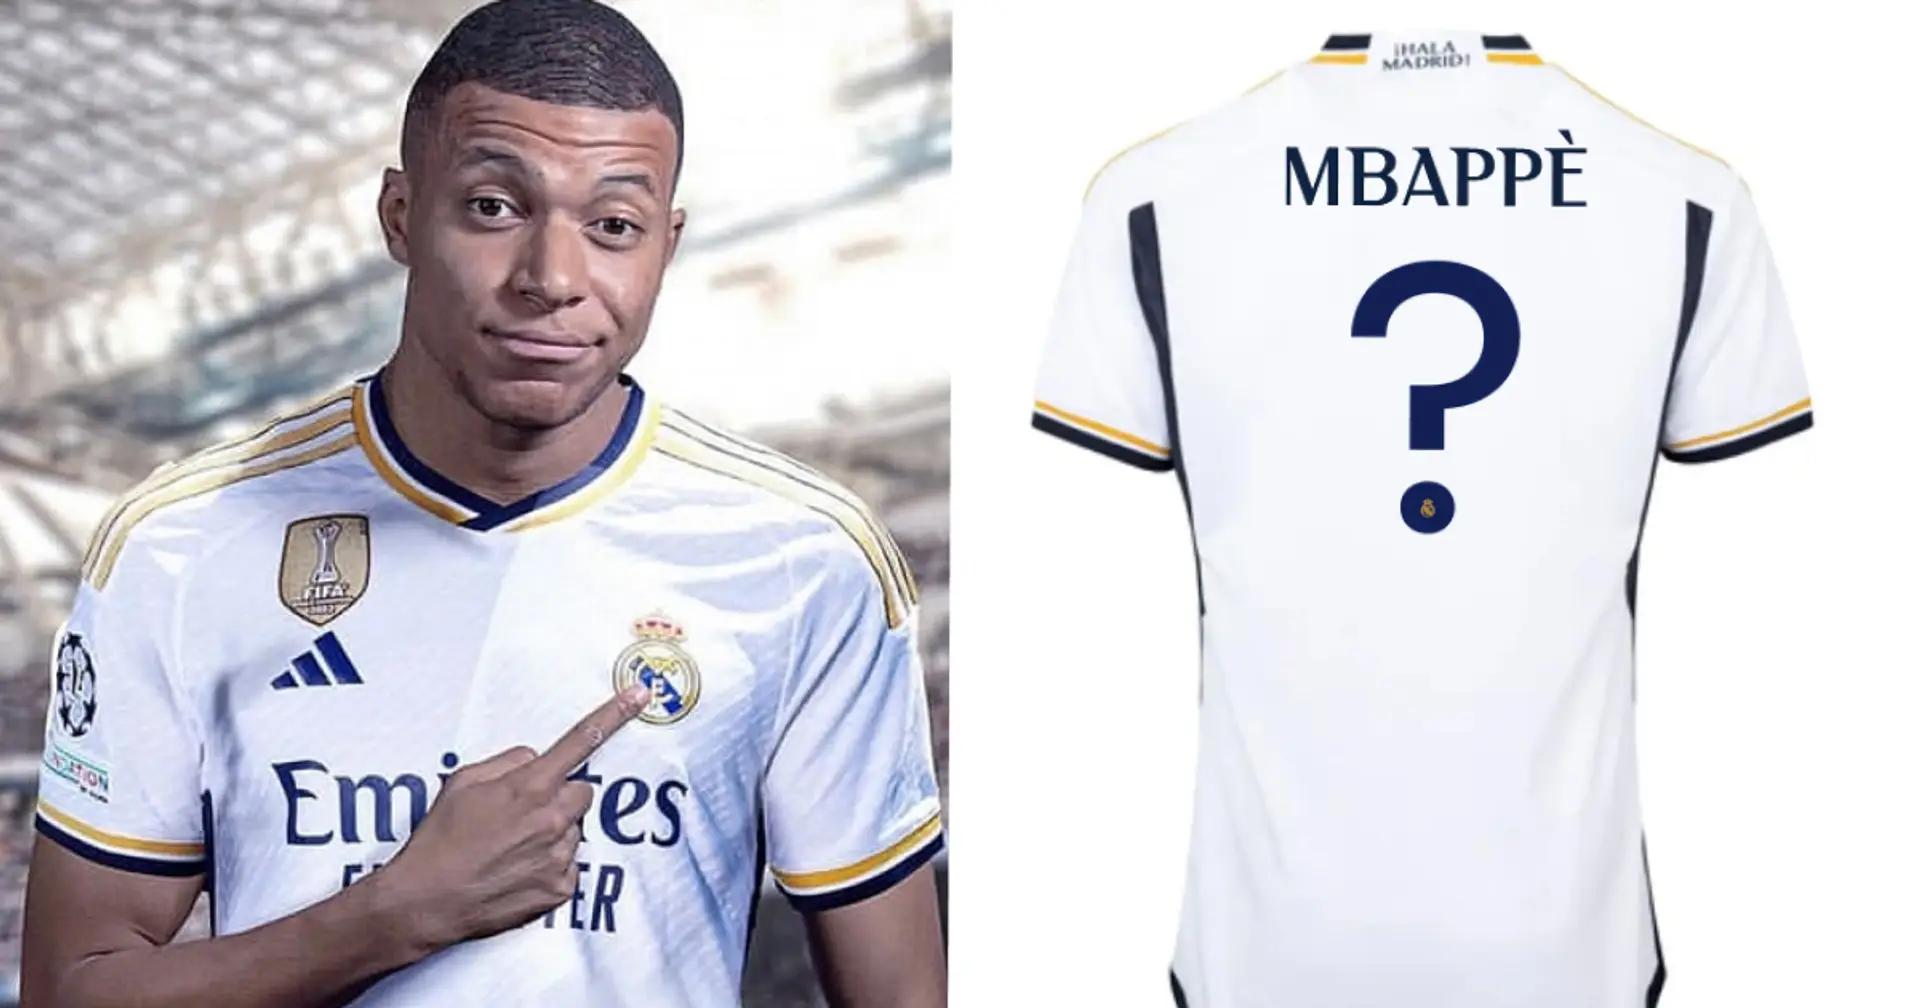 Mbappe's jersey number at Real Madrid next season revealed